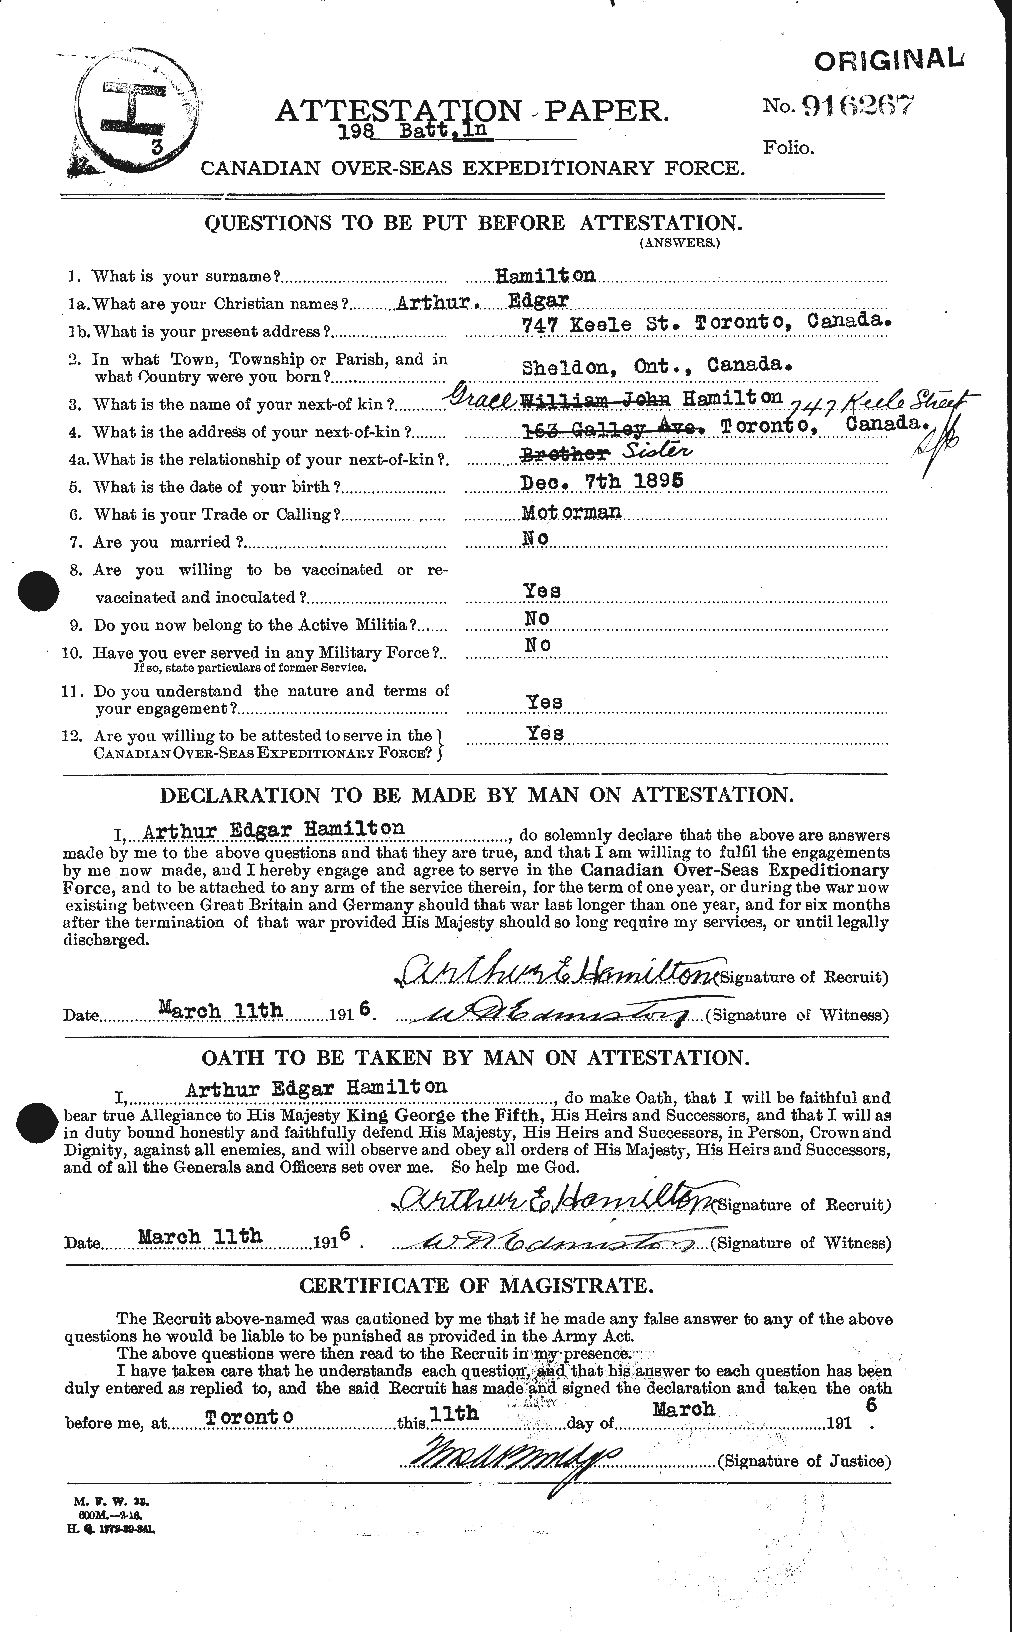 Personnel Records of the First World War - CEF 375250a